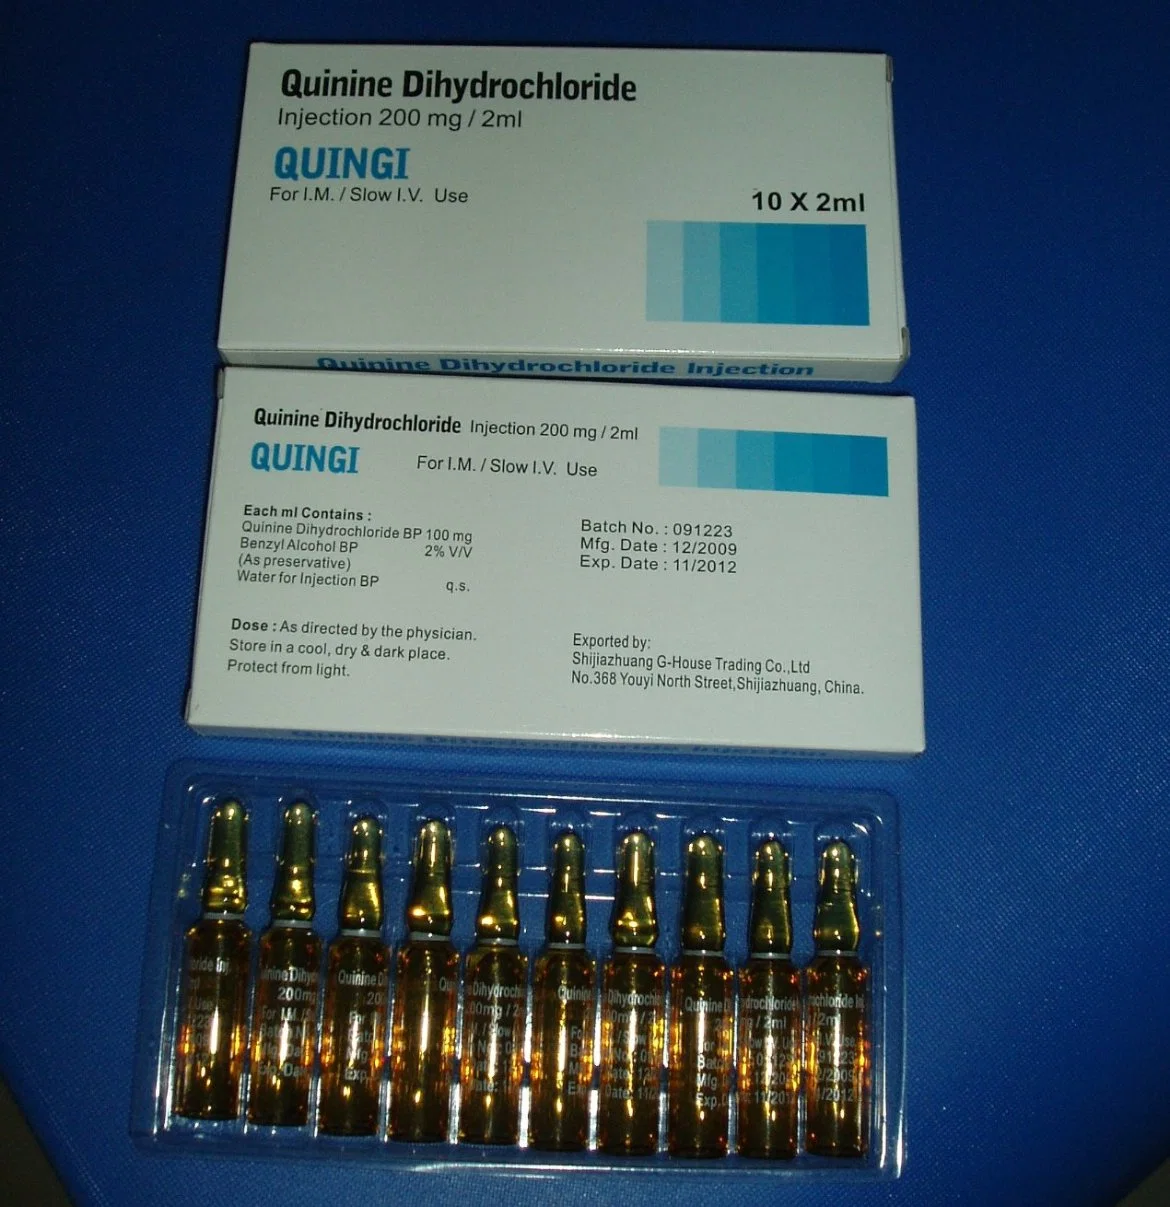 Quinine Dihydrochloride Injection 600mg/2ml 100 Ampoules/Box